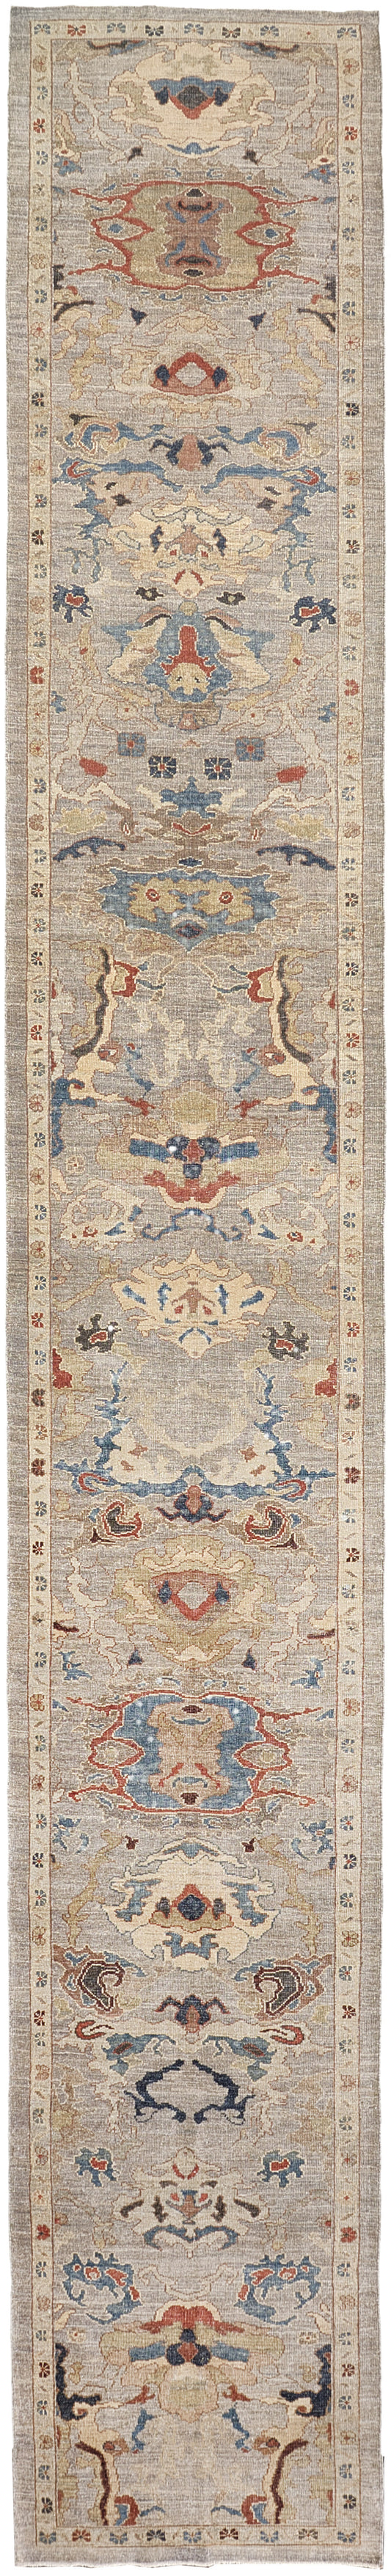 Sultanabad Runner, Sultanabad Collection